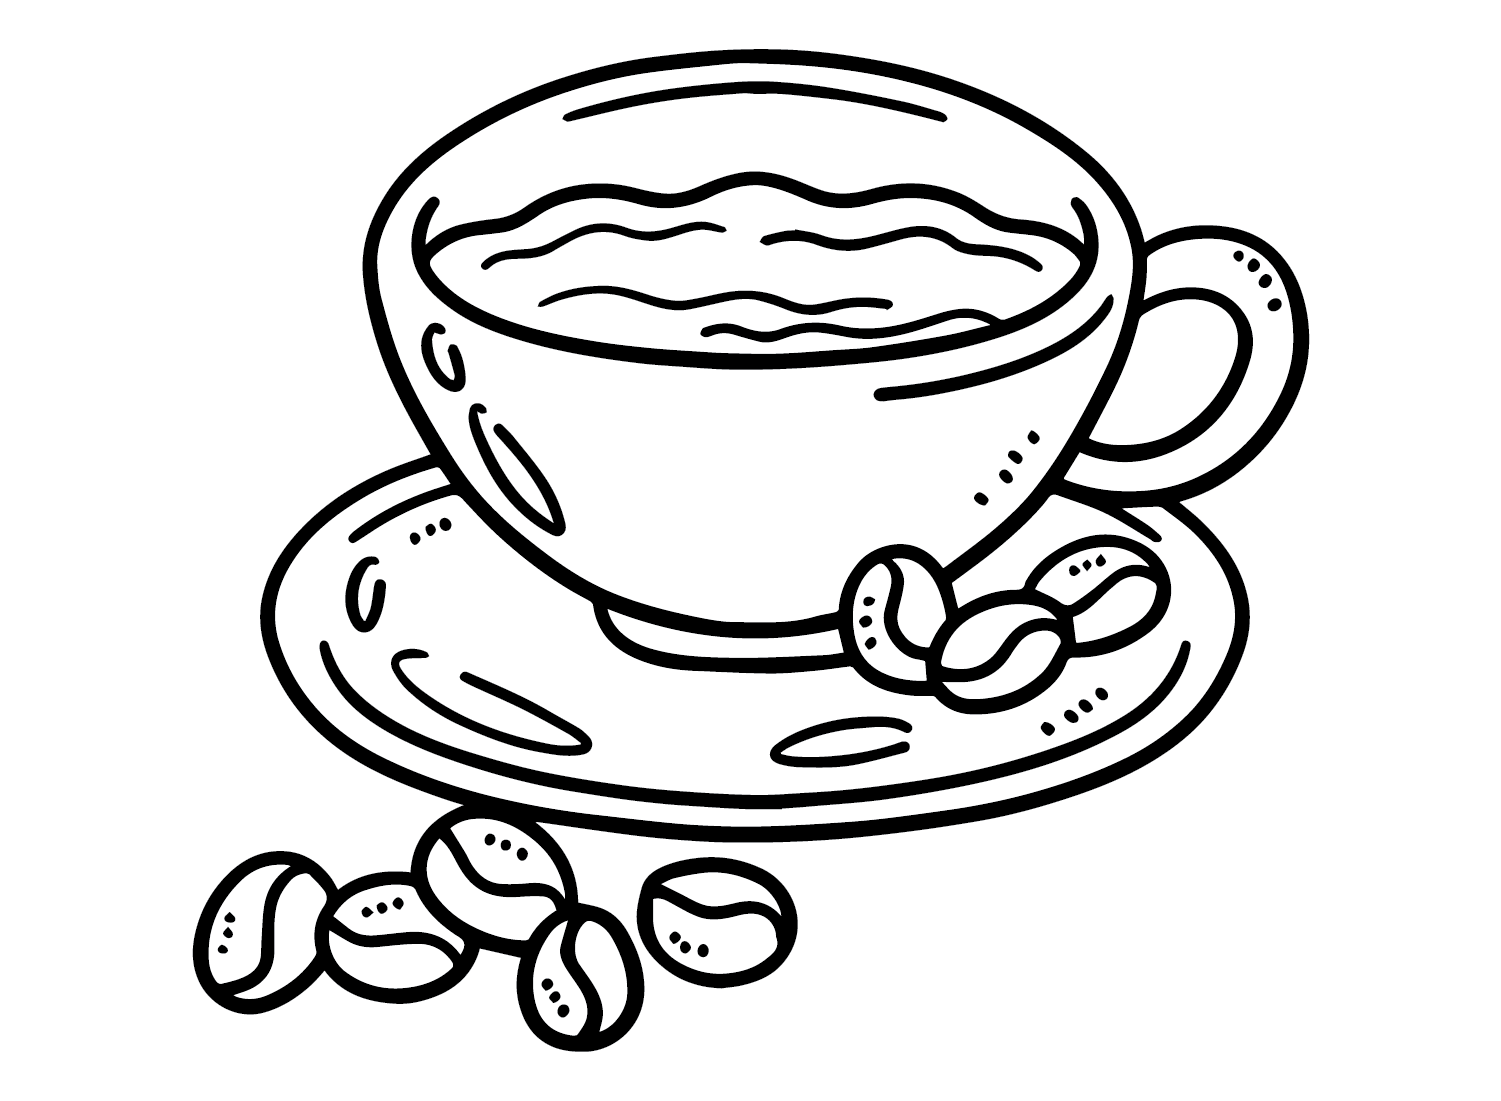 Coffee Coloring Pages Printable for Free Download